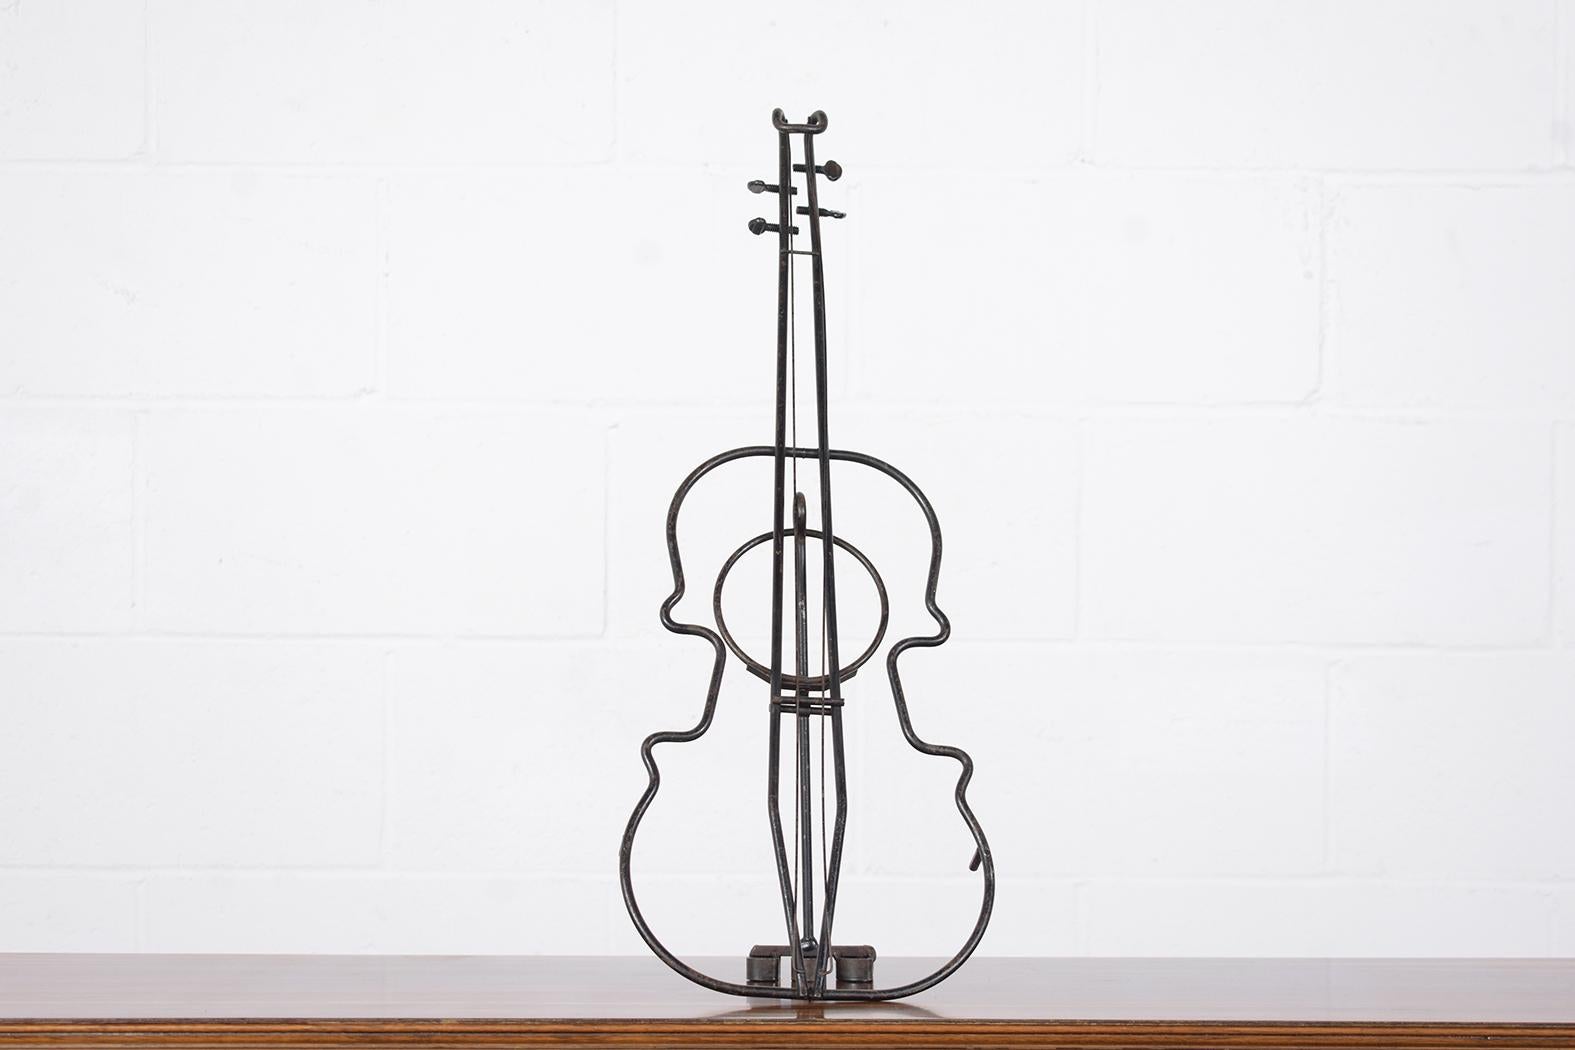 This extraordinary antique french sculptural violin is in good condition and is beautifully hand-crafted out of wrought iron, This piece is eye-catching and features incredibly forged crafted details pedestal the violing is held by a pedestal leg on